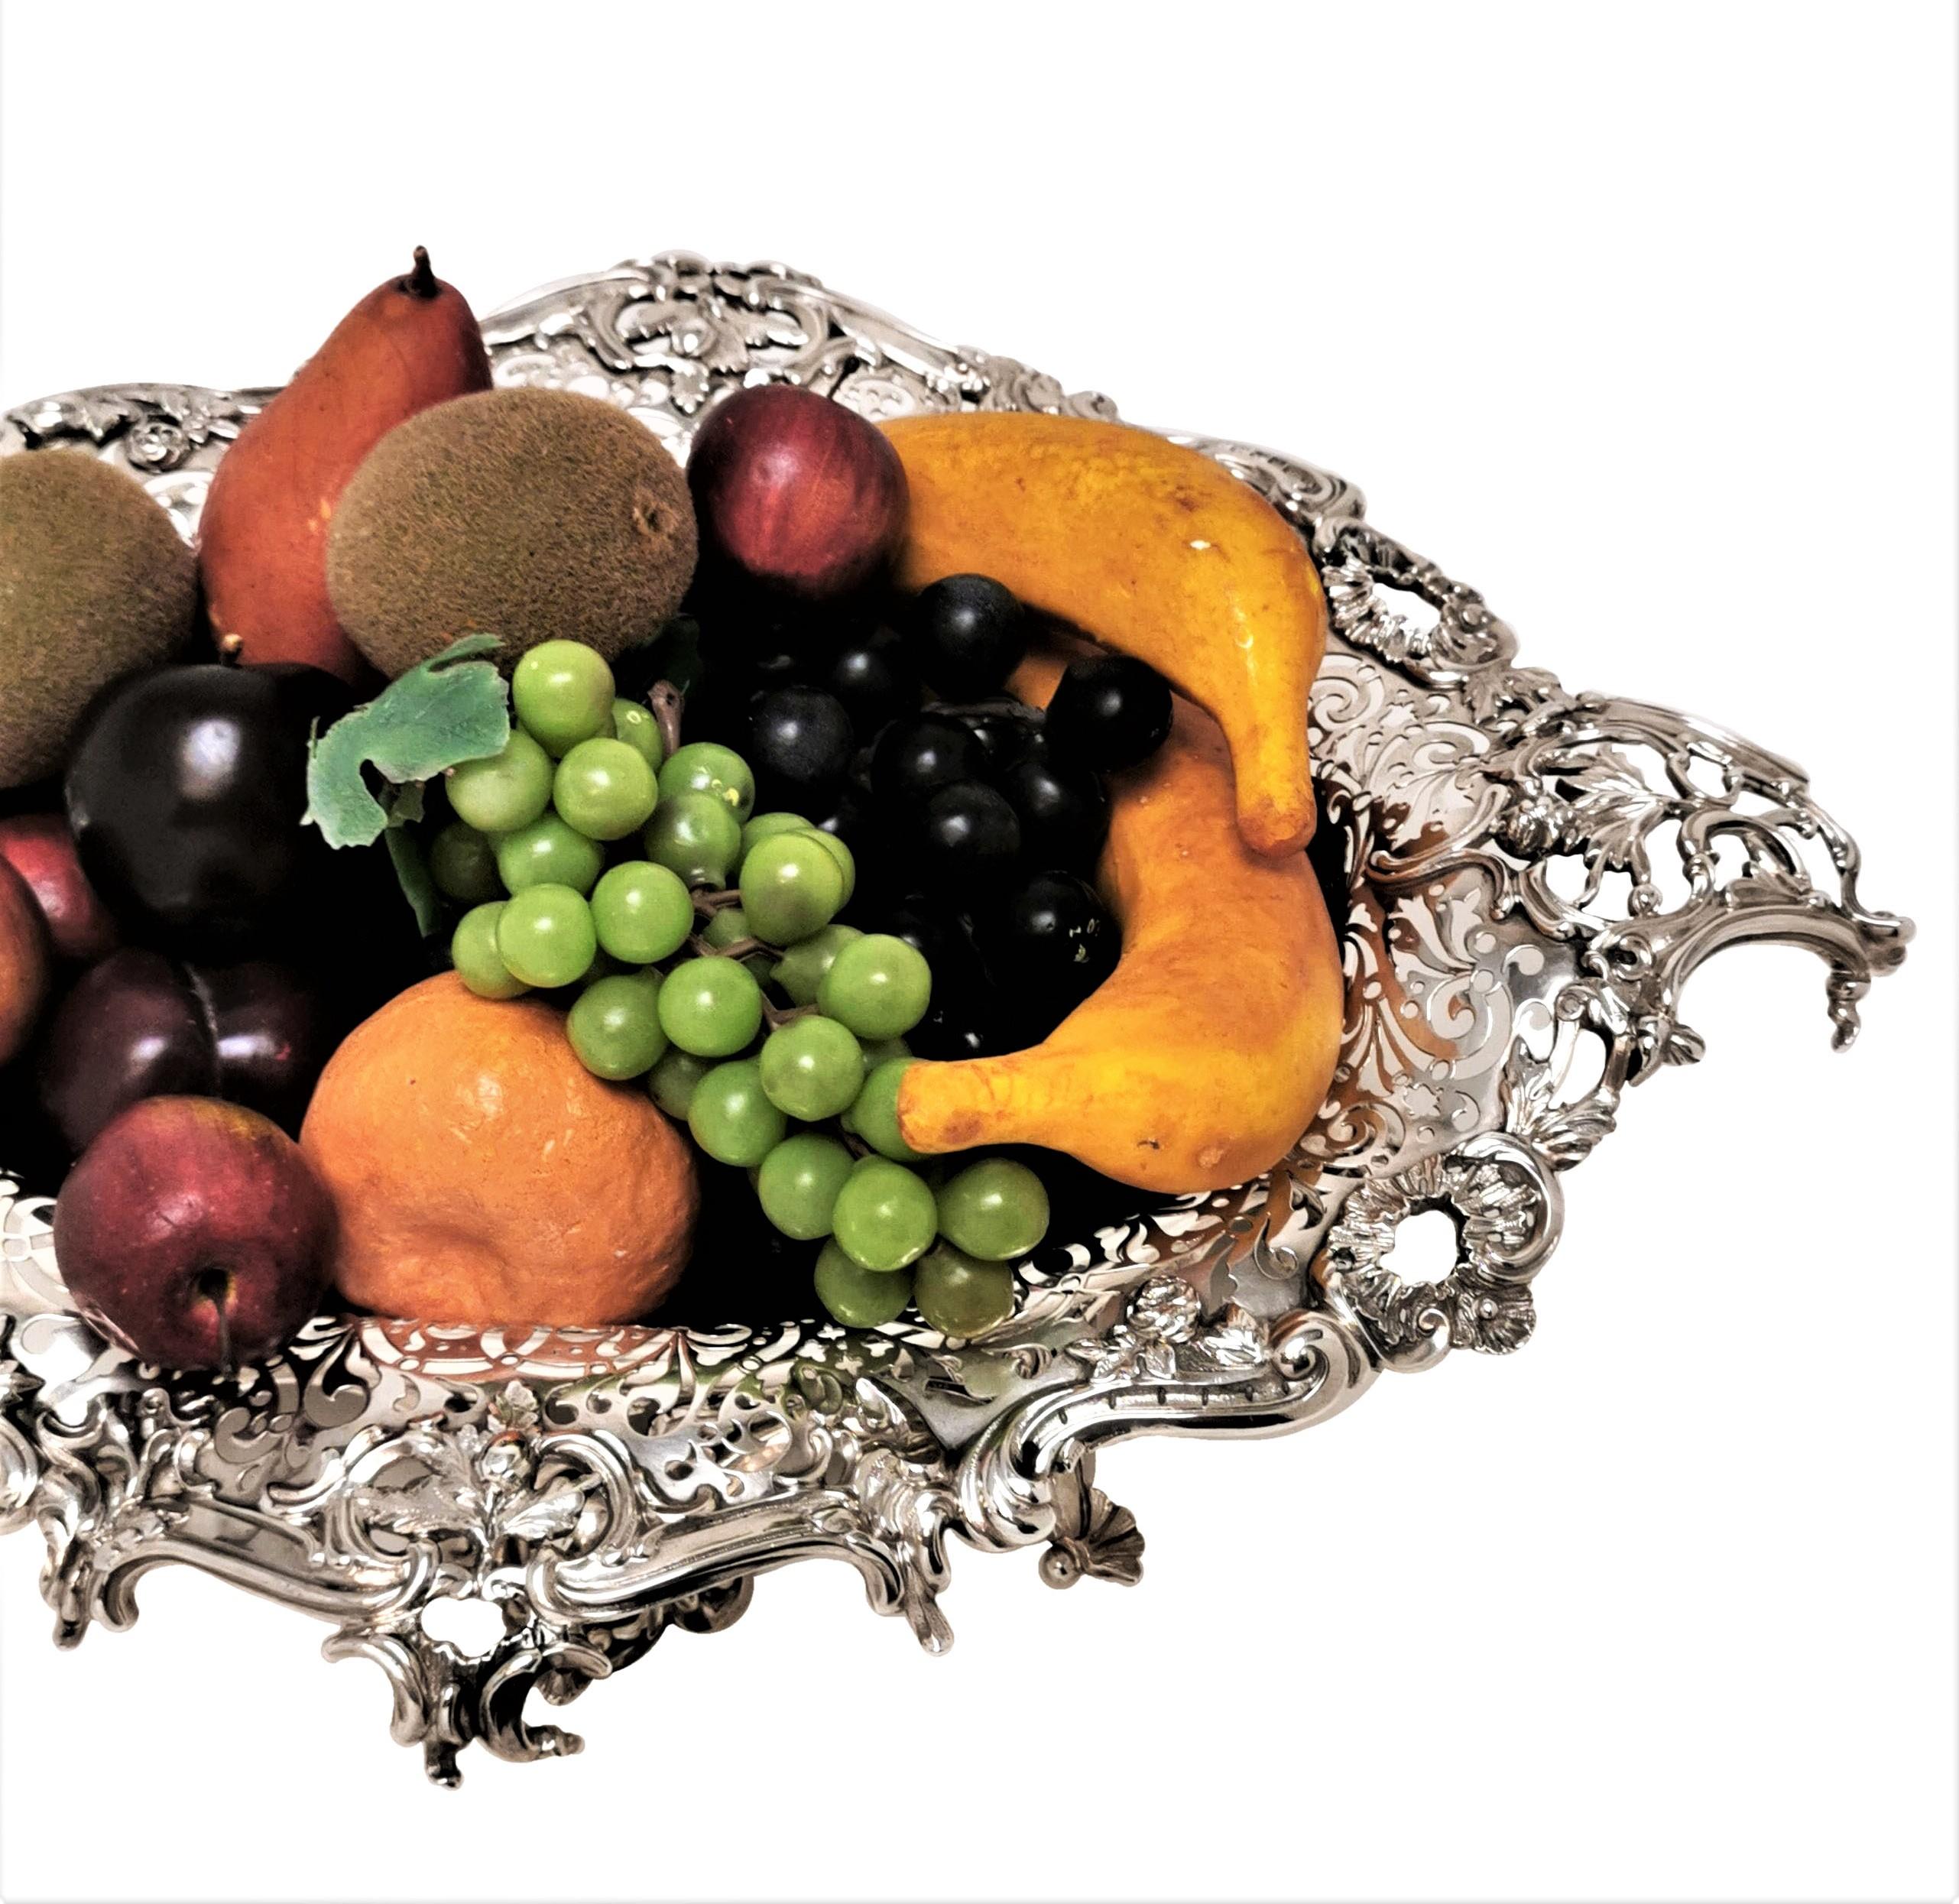 English Large Antique Victorian Sterling Silver Dish / Bowl 1883 Fruit, Centrepiece